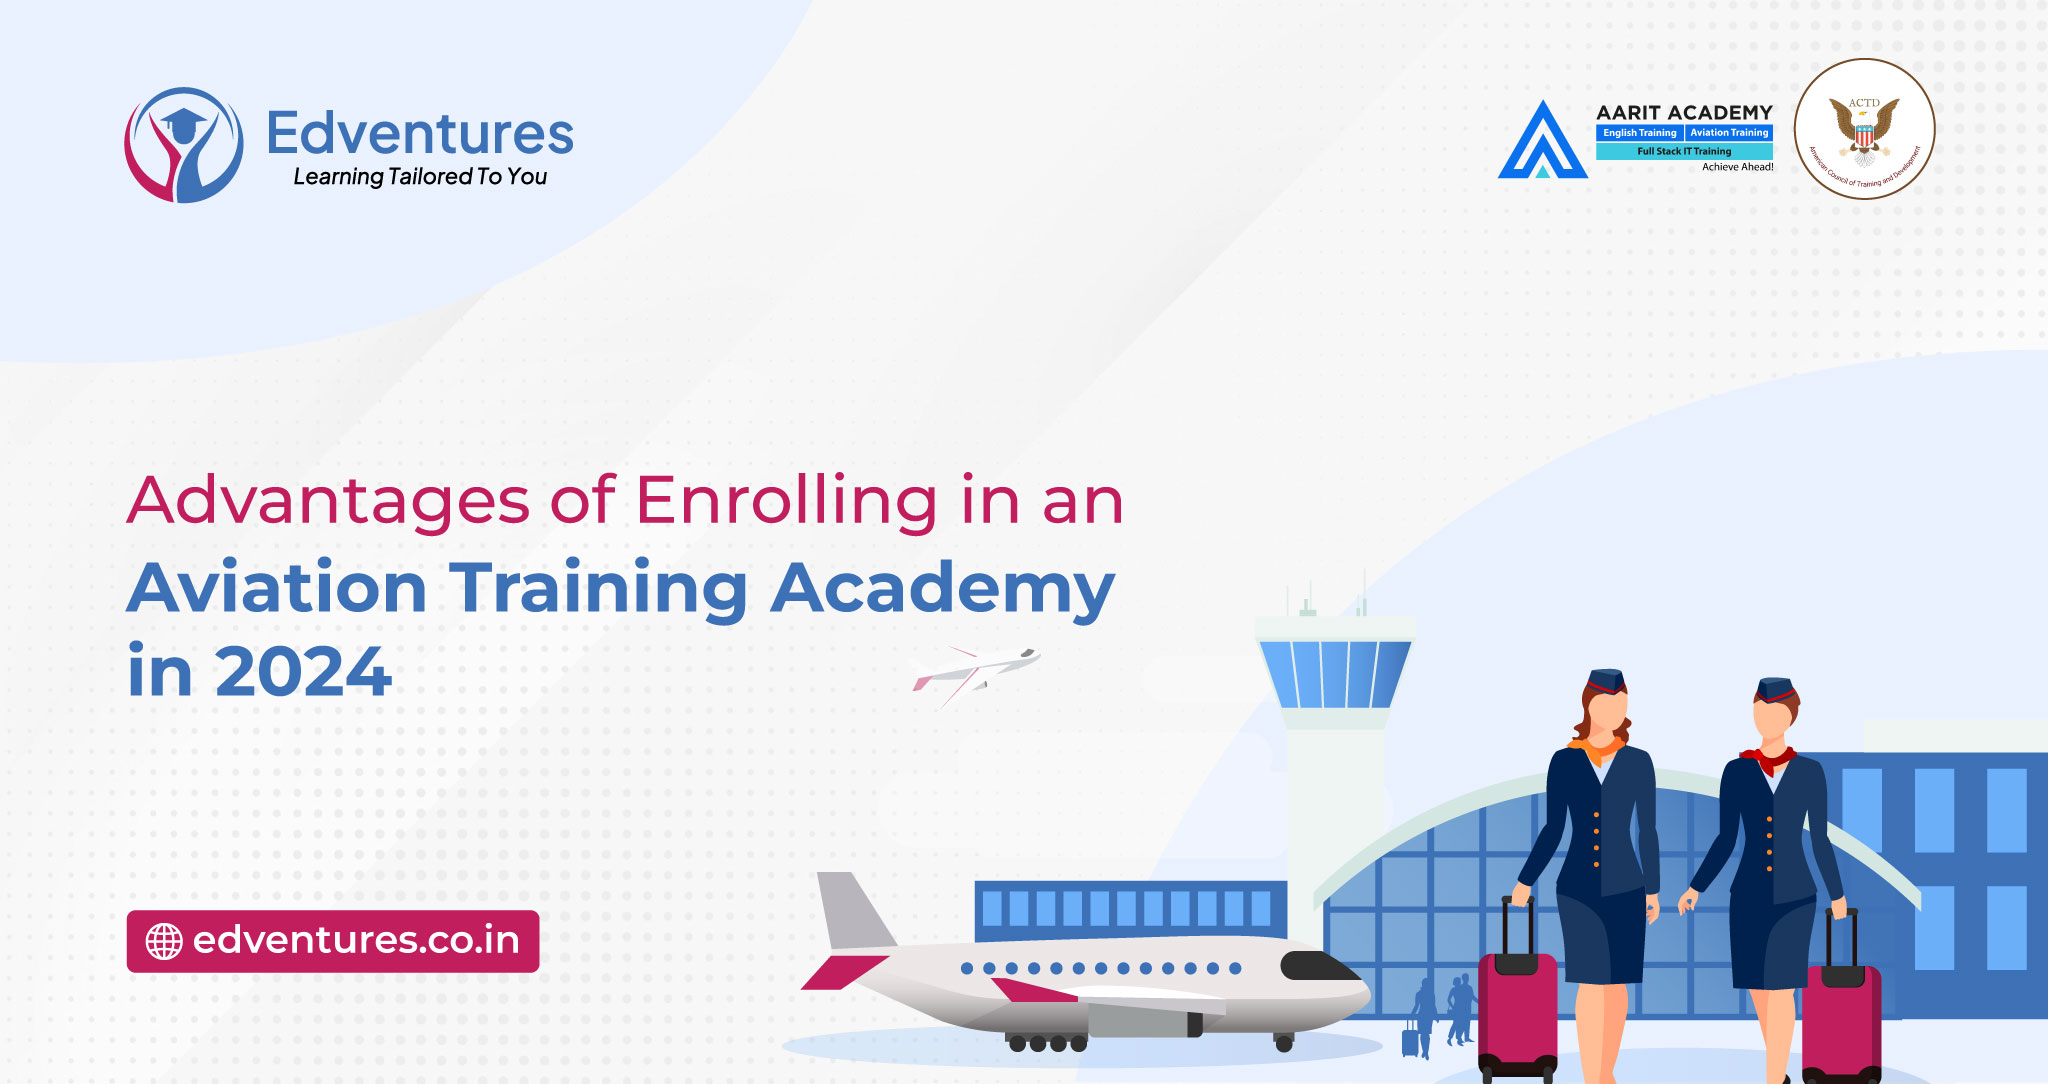 Advantages of Enrolling in an Aviation Training Academy in 2024